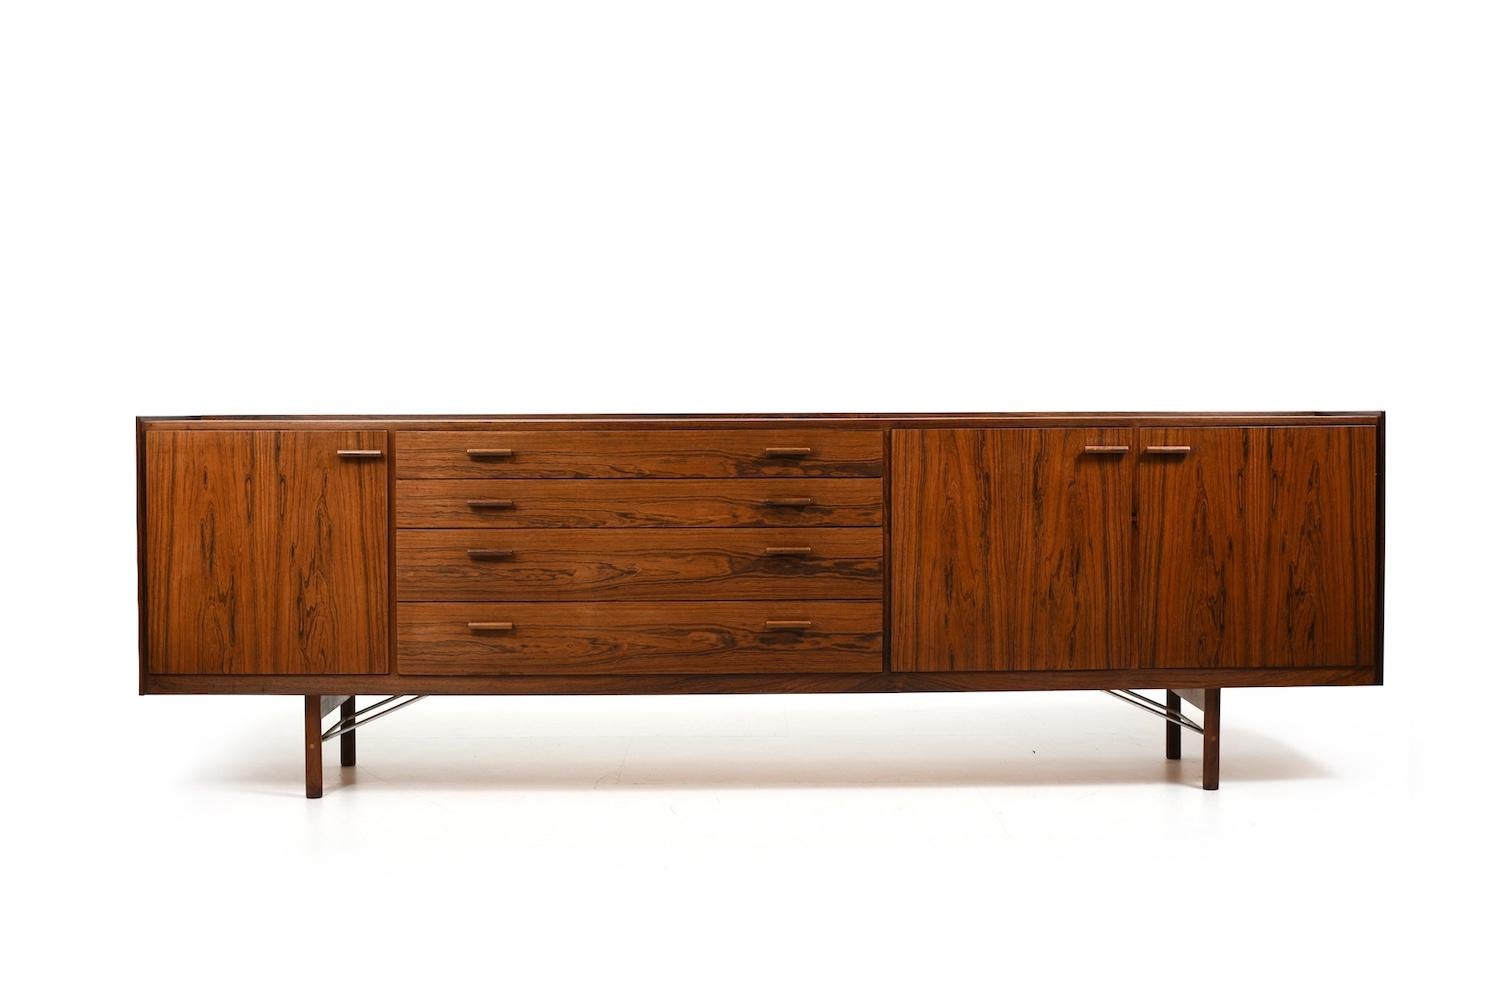 Ib Kofod-Larsen for Brande Møbelfabrik Denmark 1960s. Very fine sideboard with bar, doors , drawers and formica. Legs with beautiful details like chromed steel.